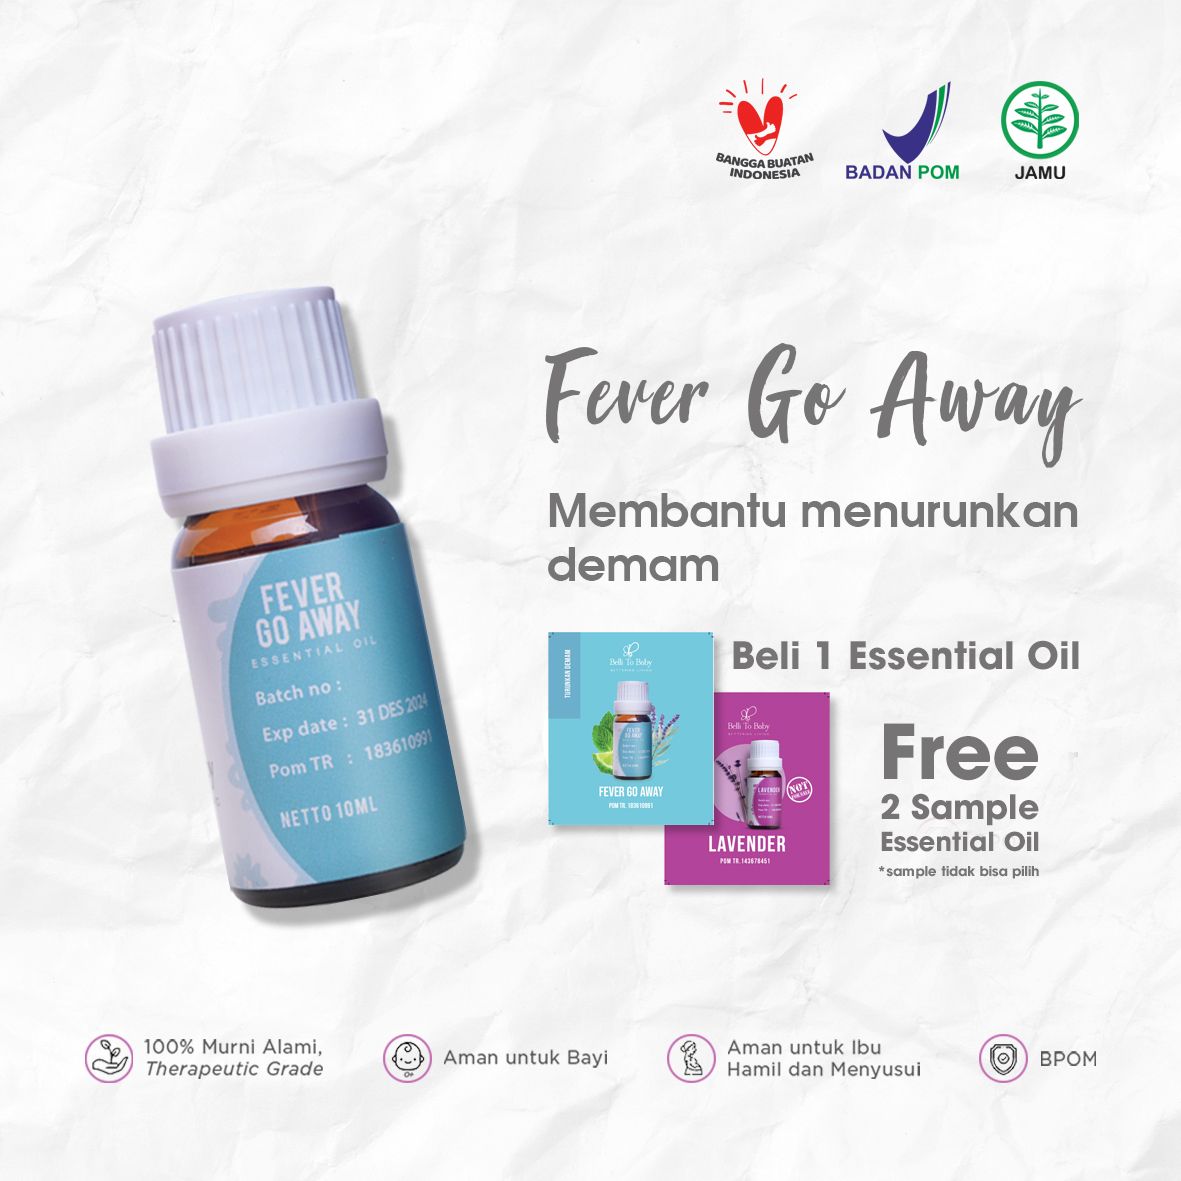 Belli To Baby Essential Oil Fever Go Away 10ml - 1